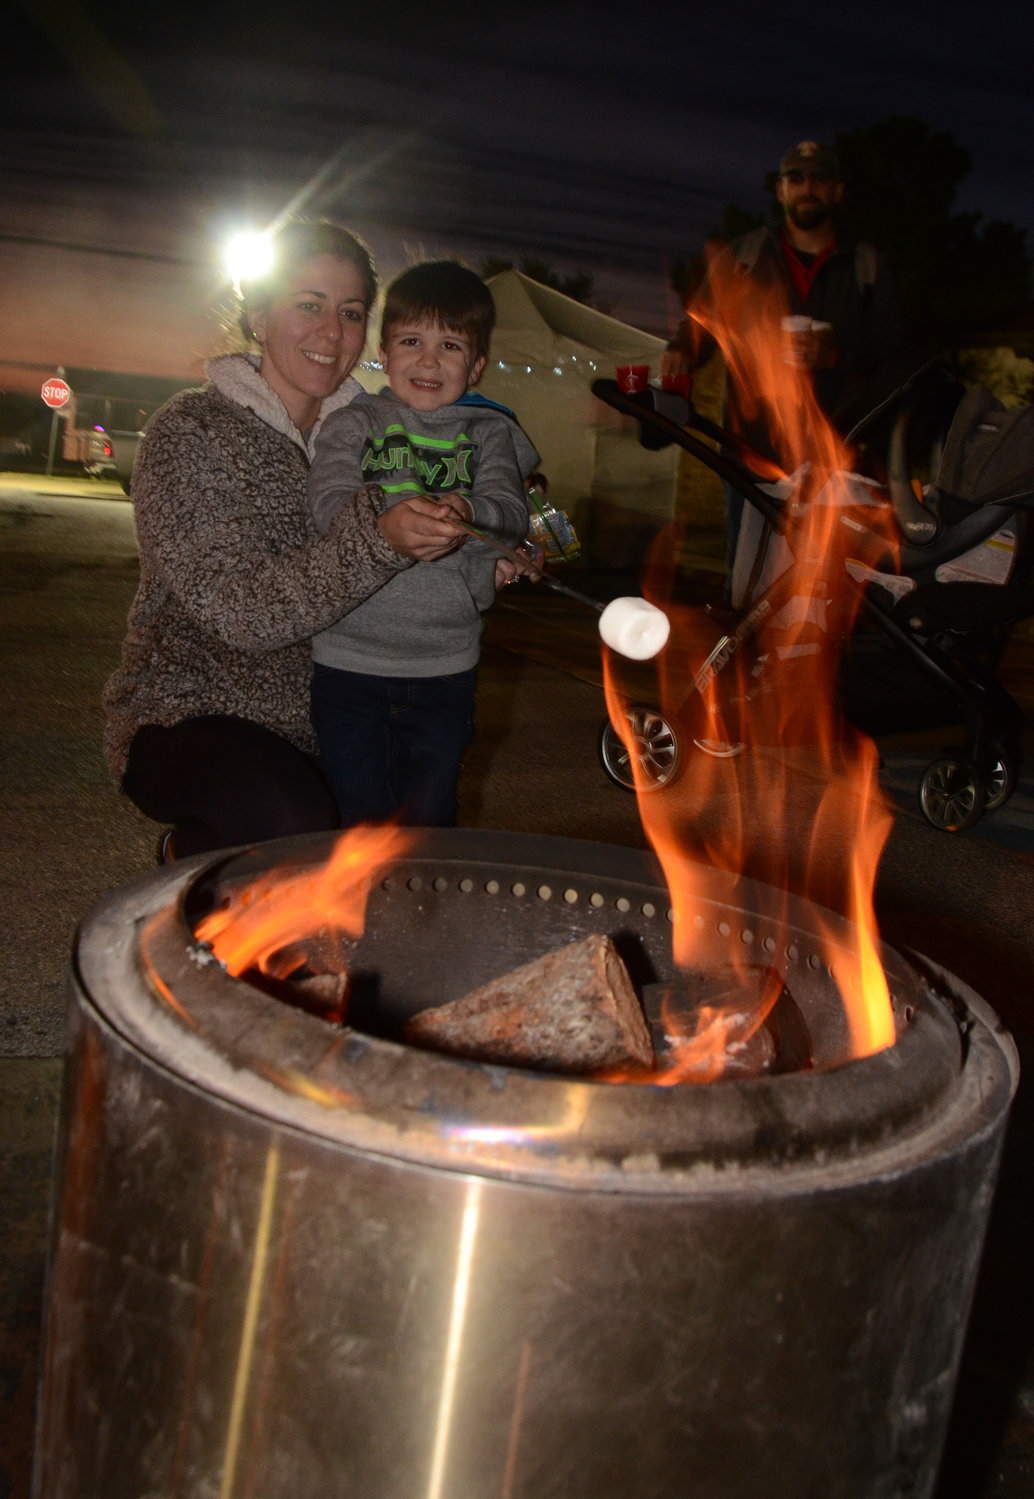 Rowan Lapenna roasts a marshmallow with the help of mother, Tiffany Lapenna.